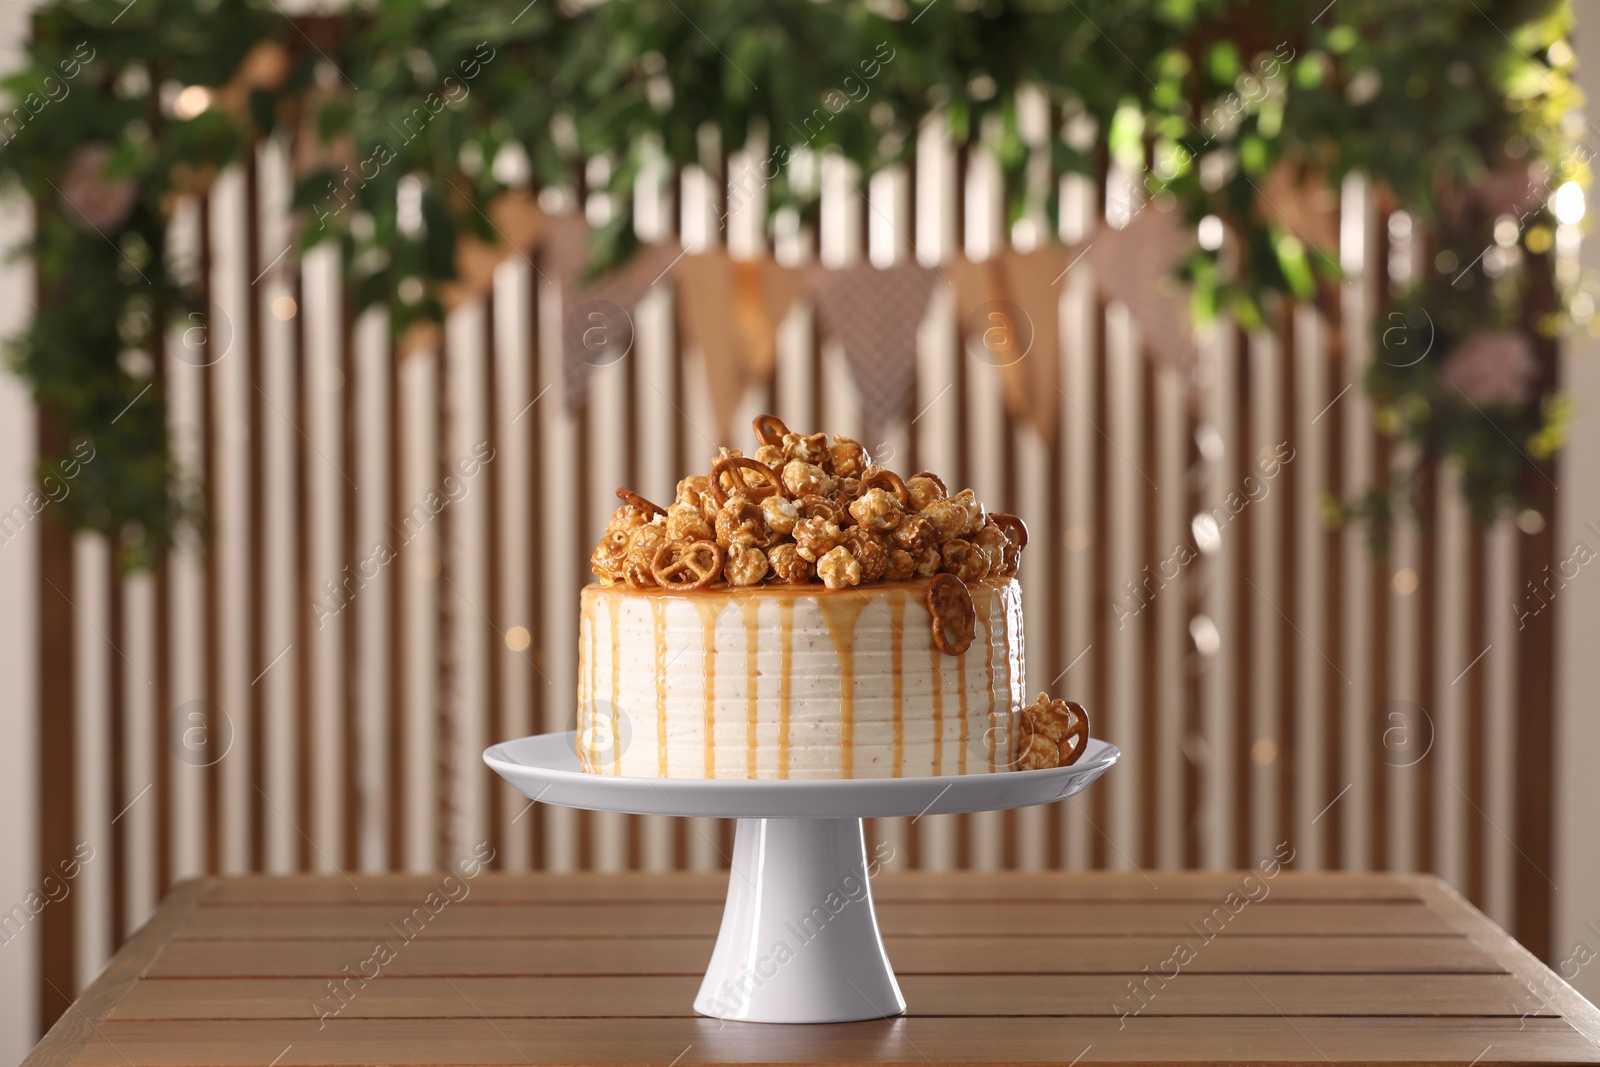 Photo of Caramel drip cake decorated with popcorn and pretzels on wooden table